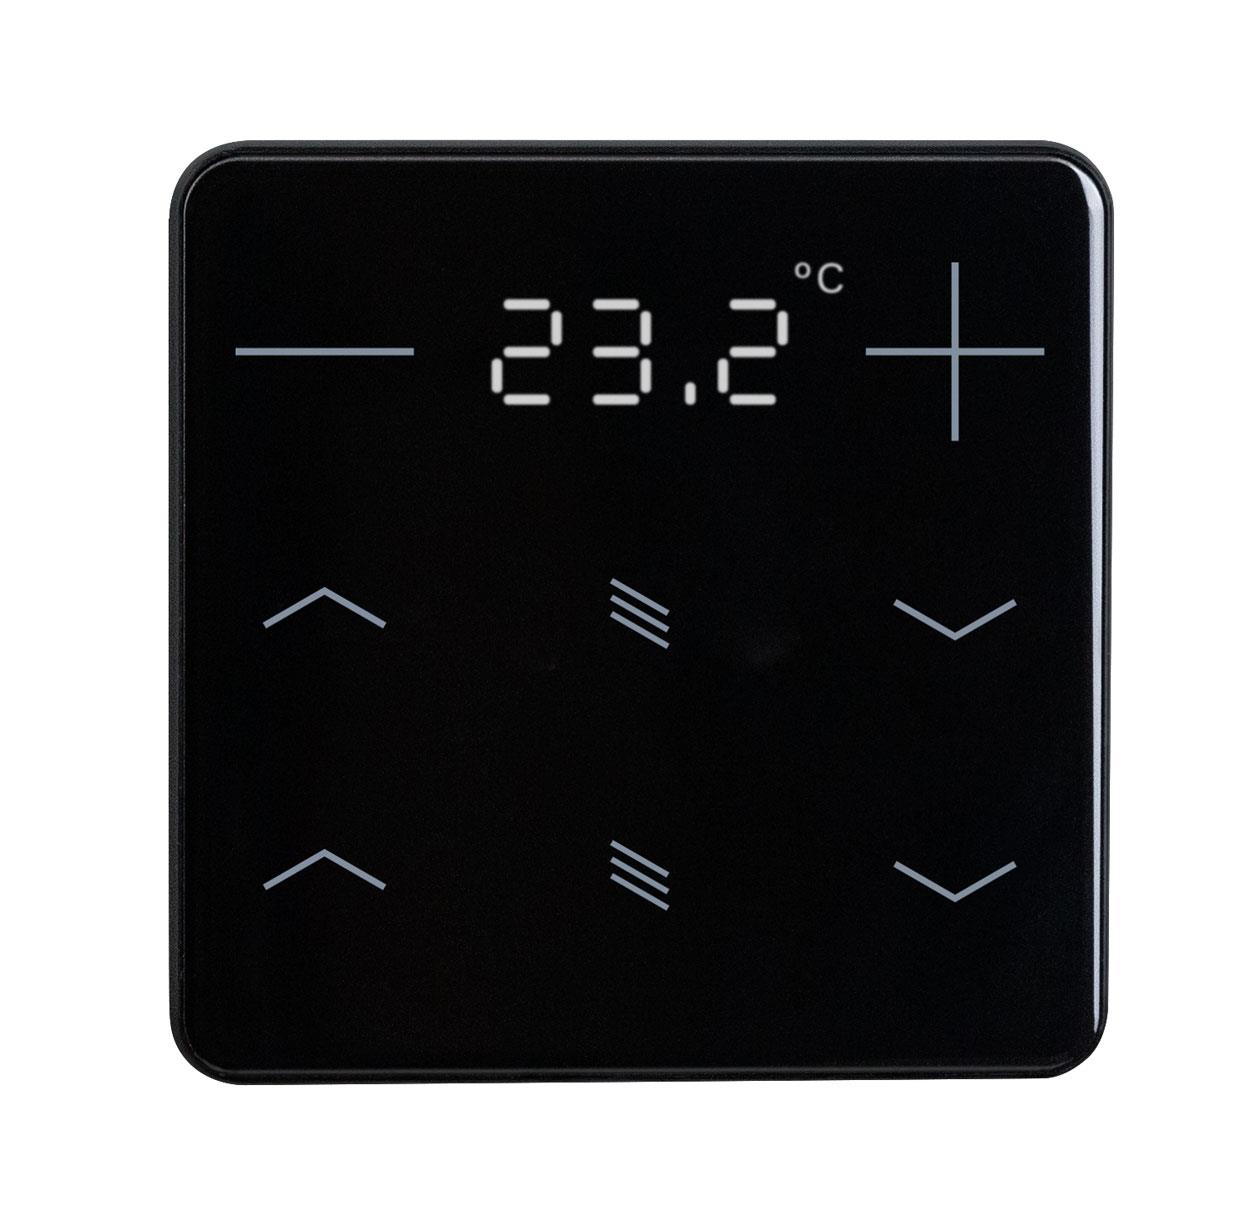 KNX eTR 202 Sunblind, black Button for Temperature, 2x Solar Protection